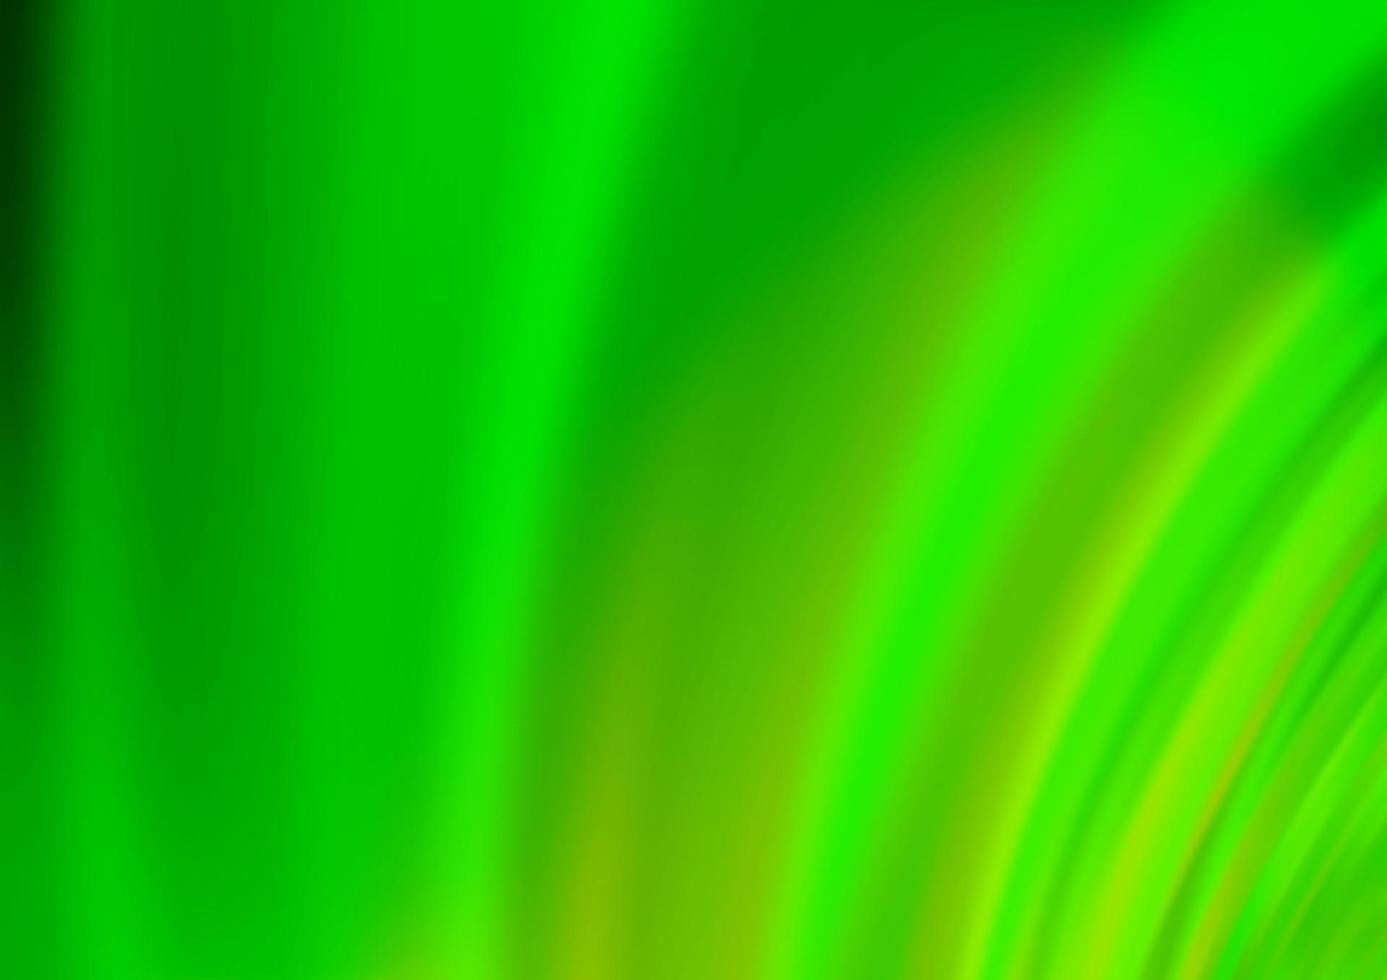 Light Green vector background with liquid shapes.